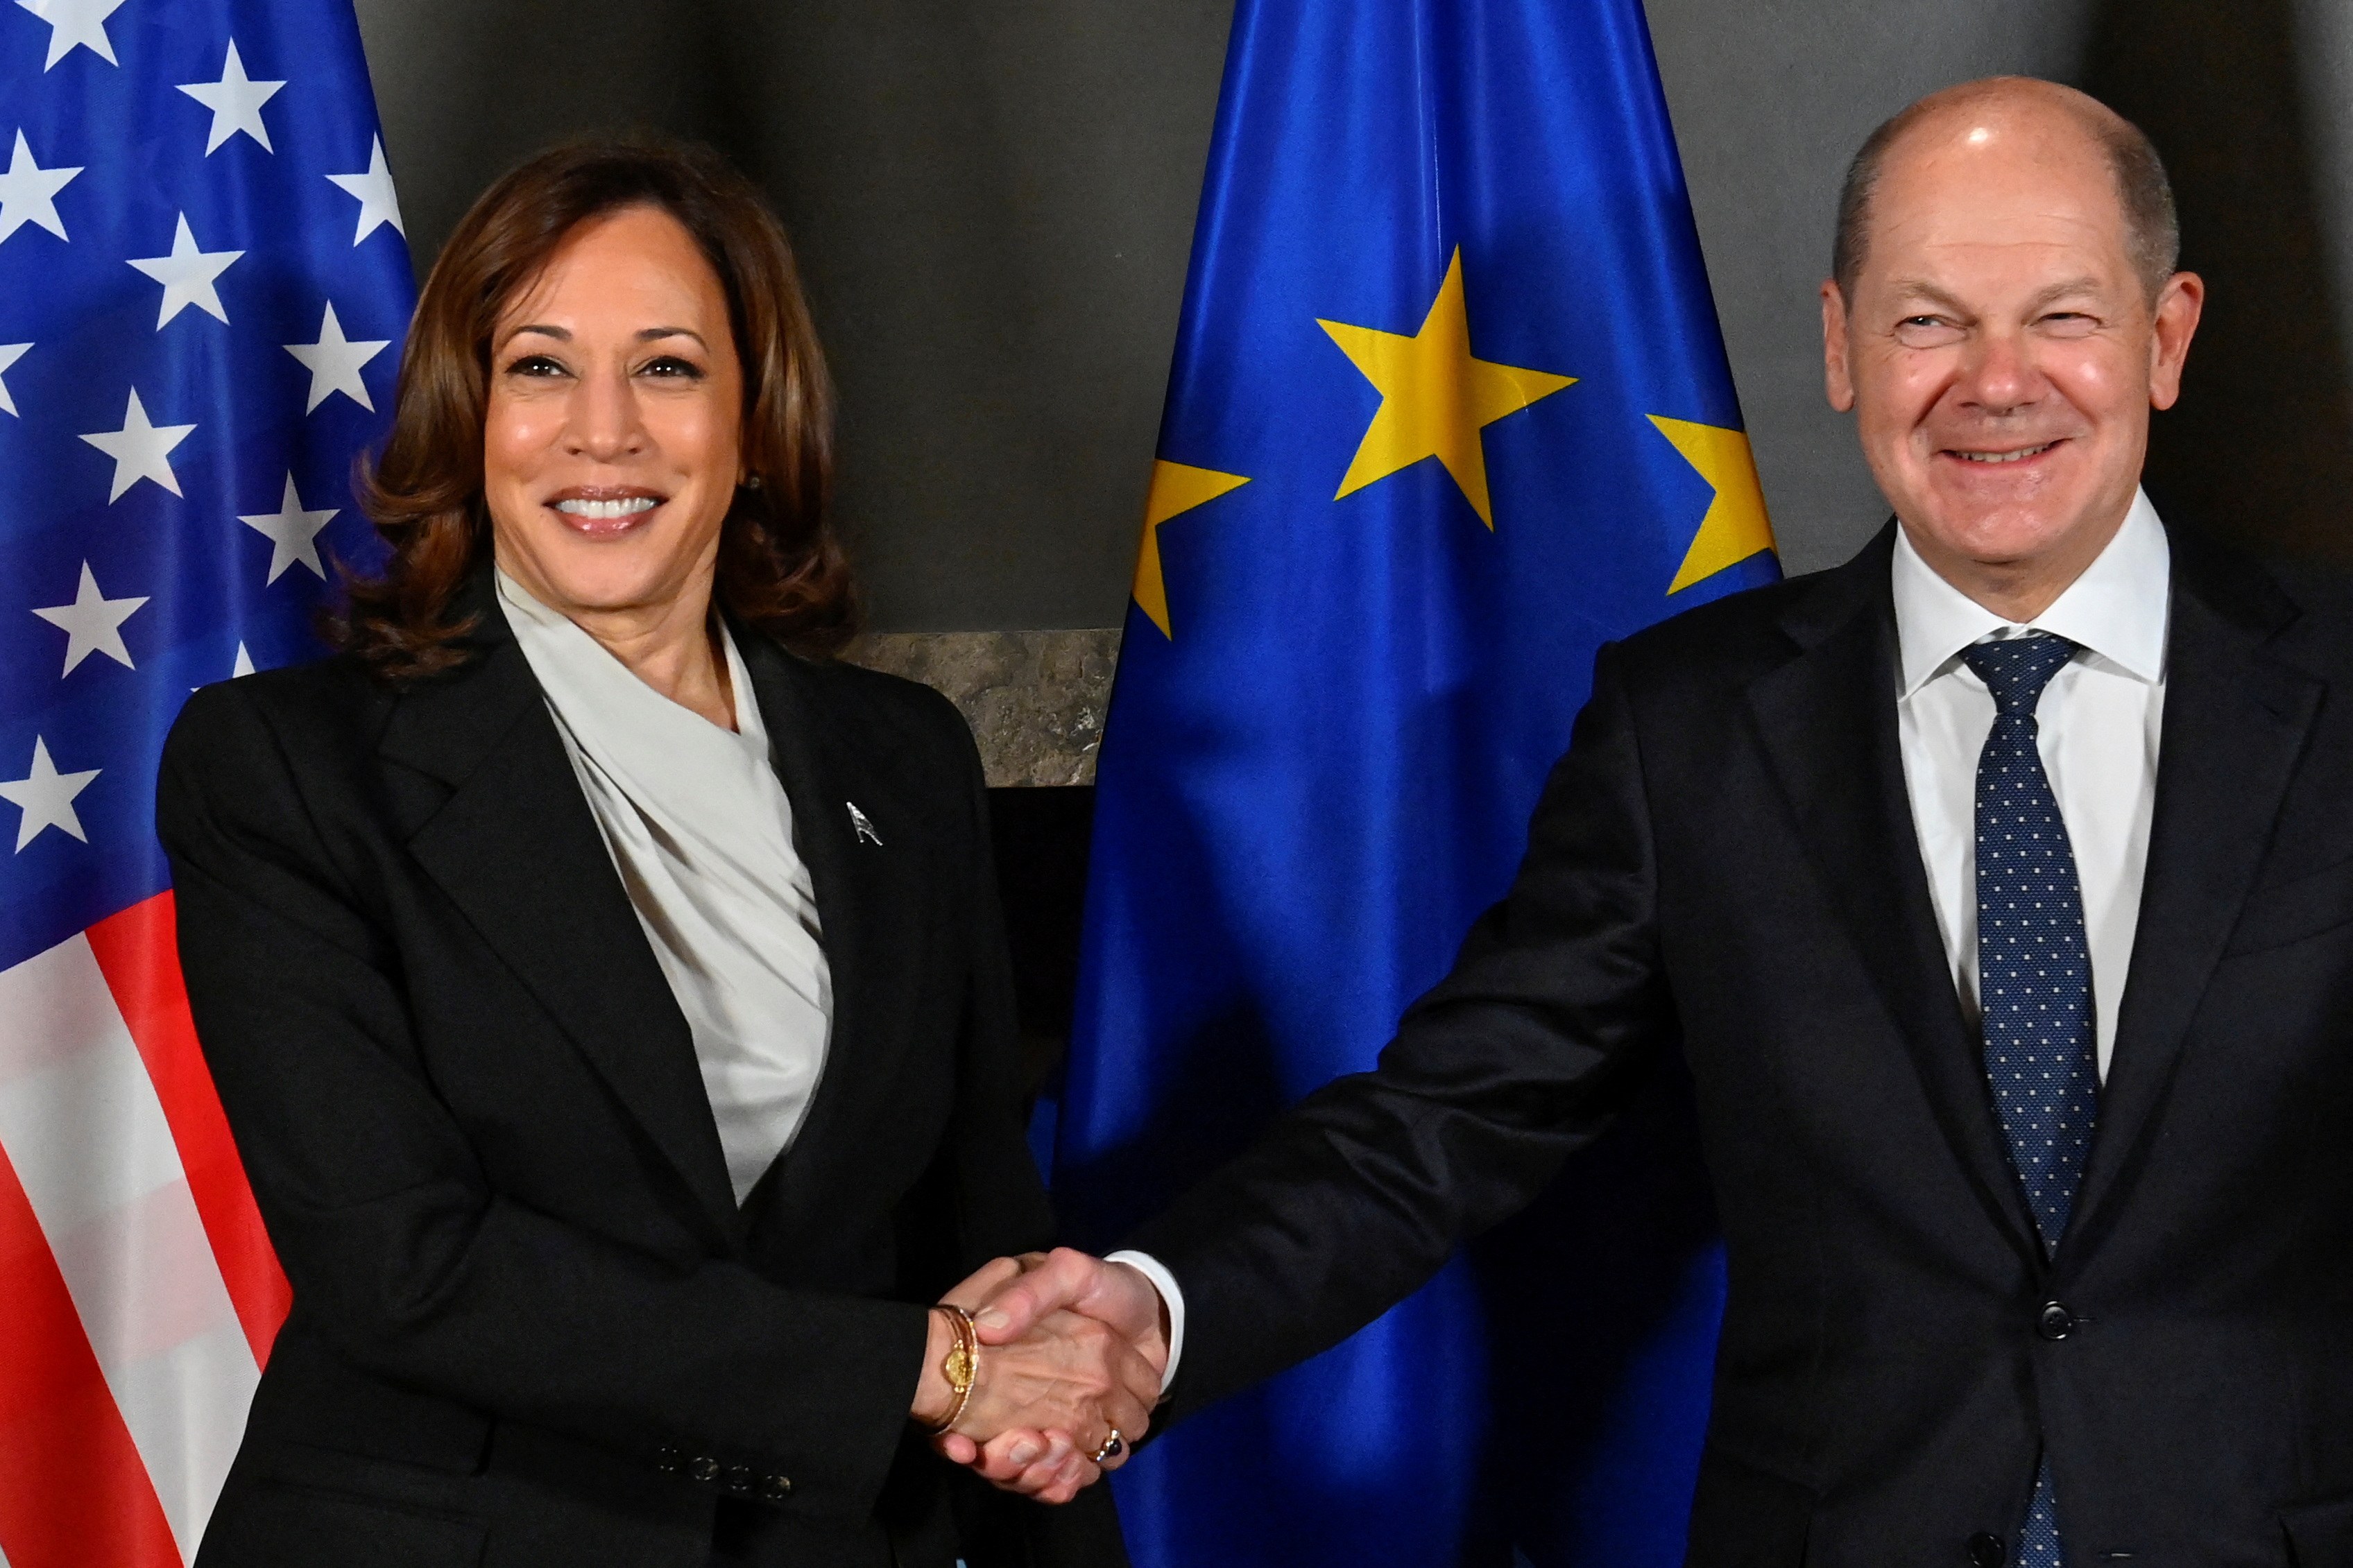 German Chancellor Olaf Scholz and US Vice President Kamala Harris shake hands during their bilateral meeting at the Munich Security Conference (MSC) in Munich, Germany.  Thomas Kienzle/Pool via REUTERS